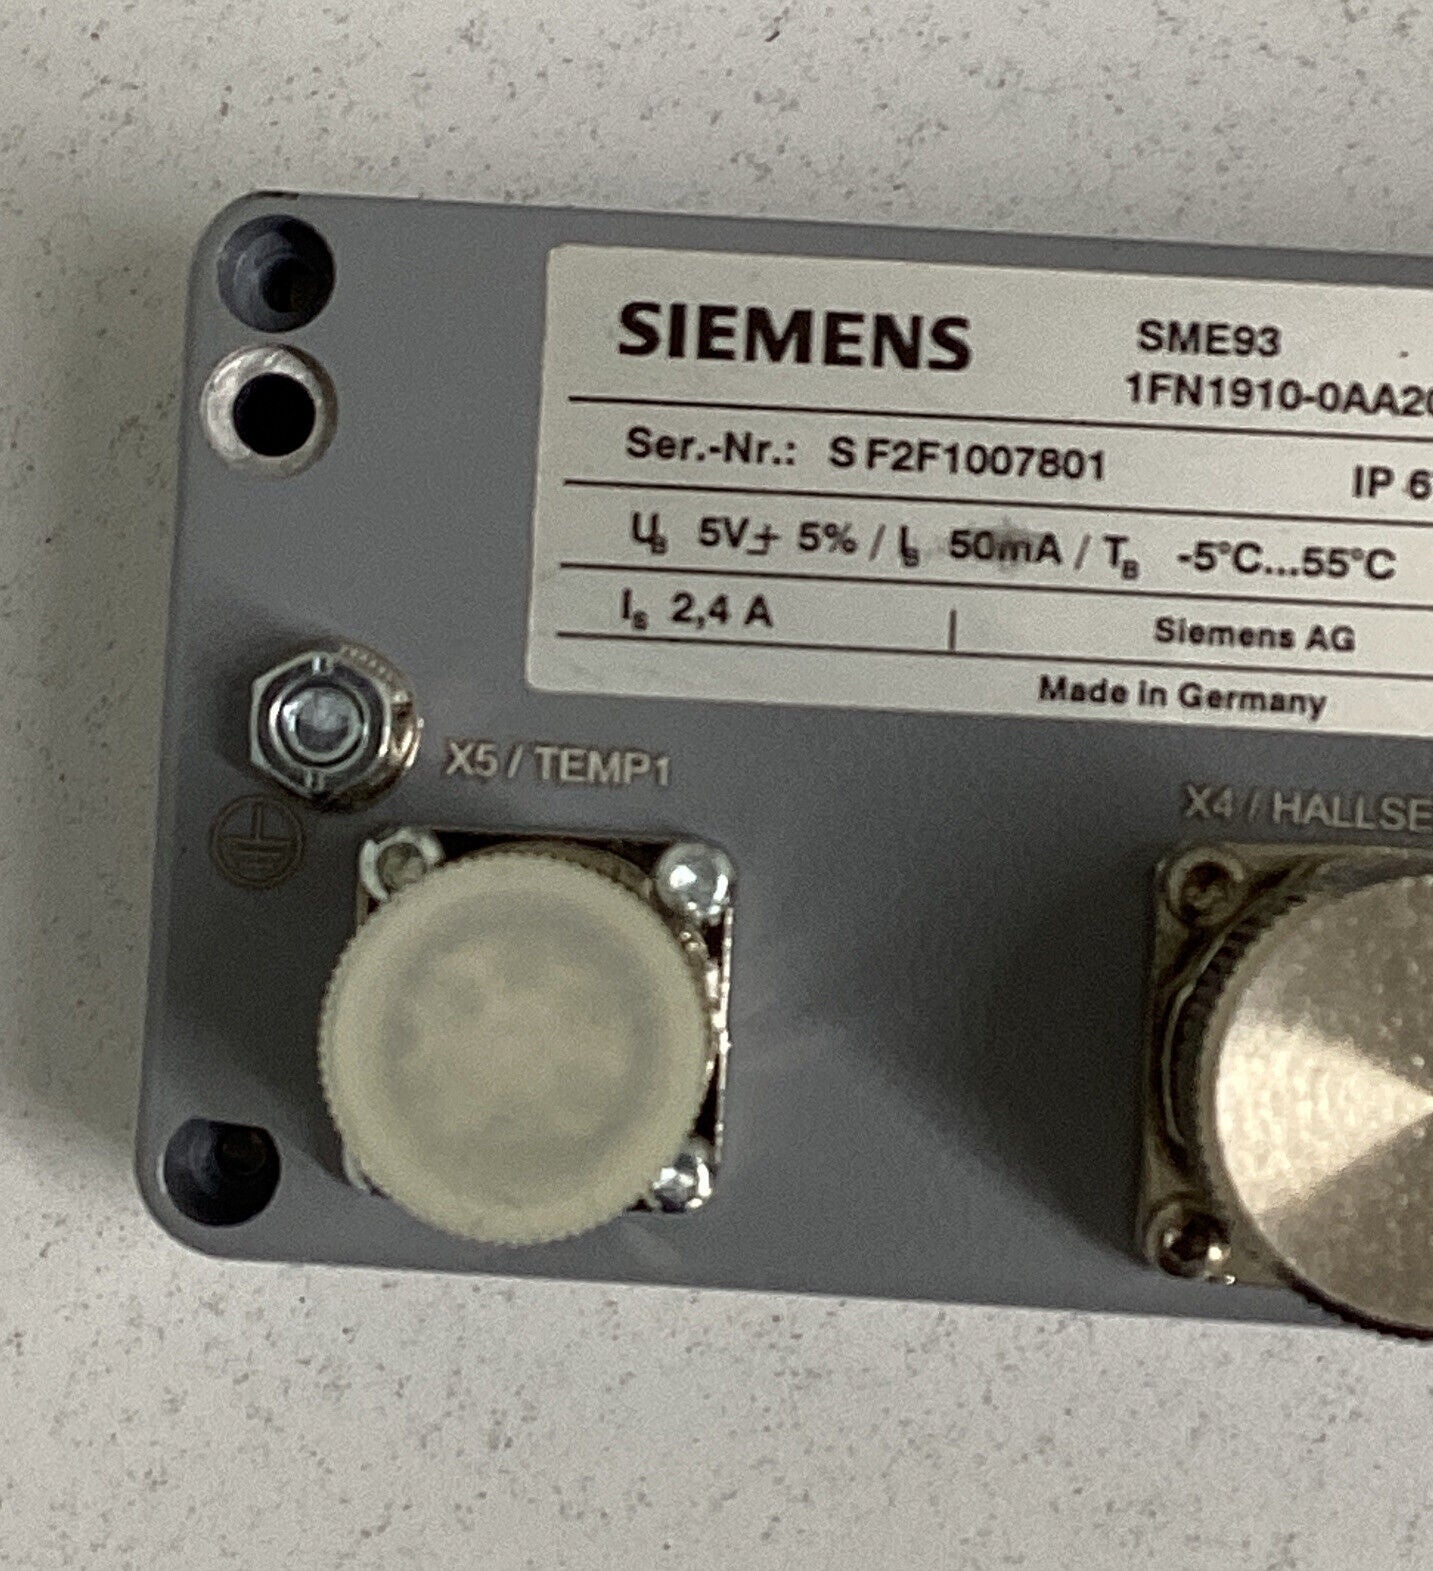 Siemens  1FN1910-0AA20-3AA0 New SME93 Encoder Connection Box (CL193)